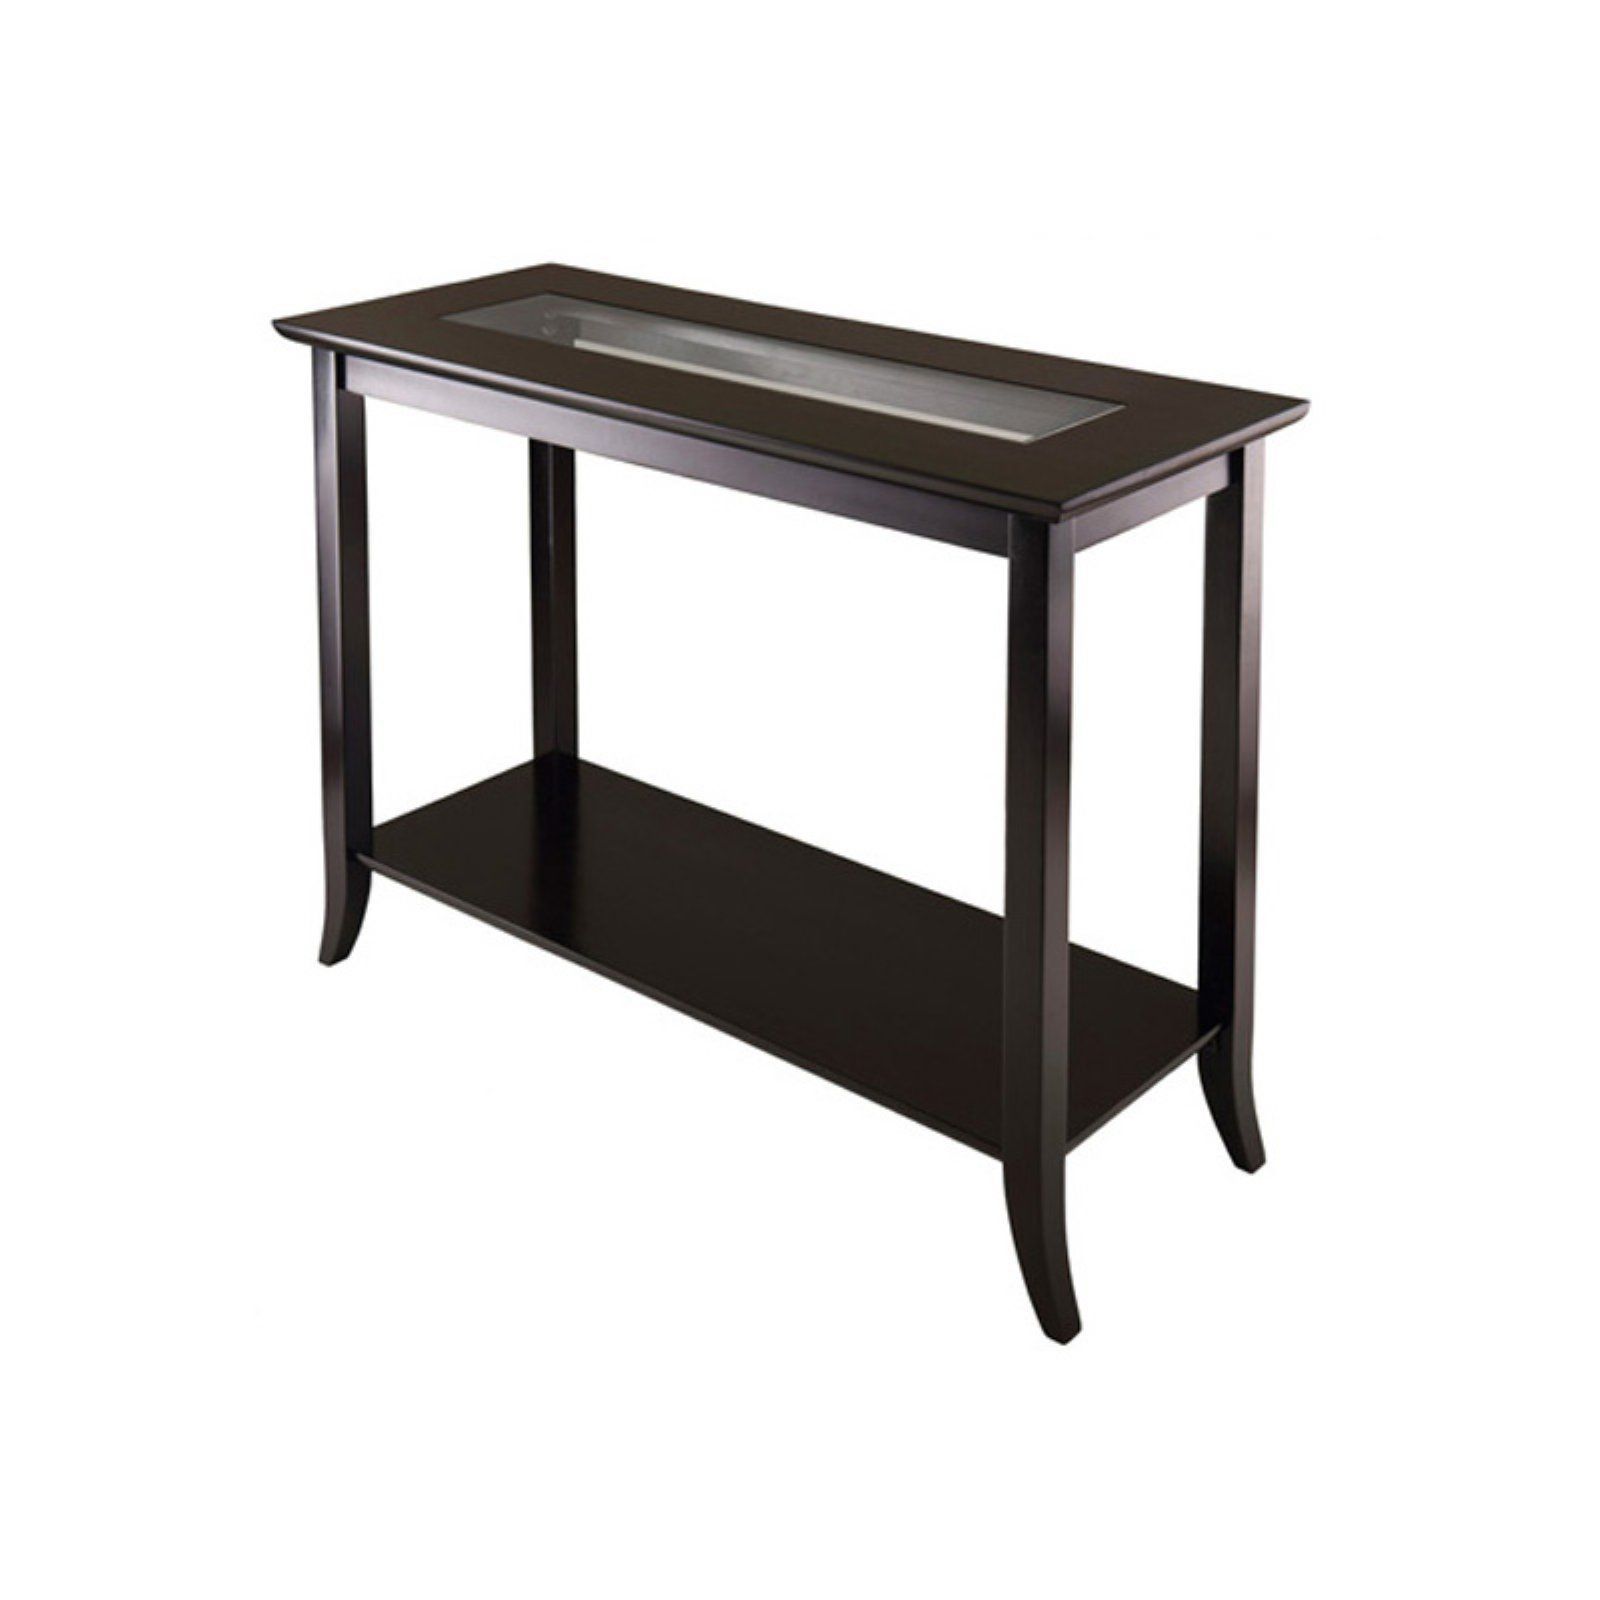 Winsome Genoa Rectangular Console Table With Glass Top | Winsome Wood With Wood Rectangular Console Tables (View 11 of 20)